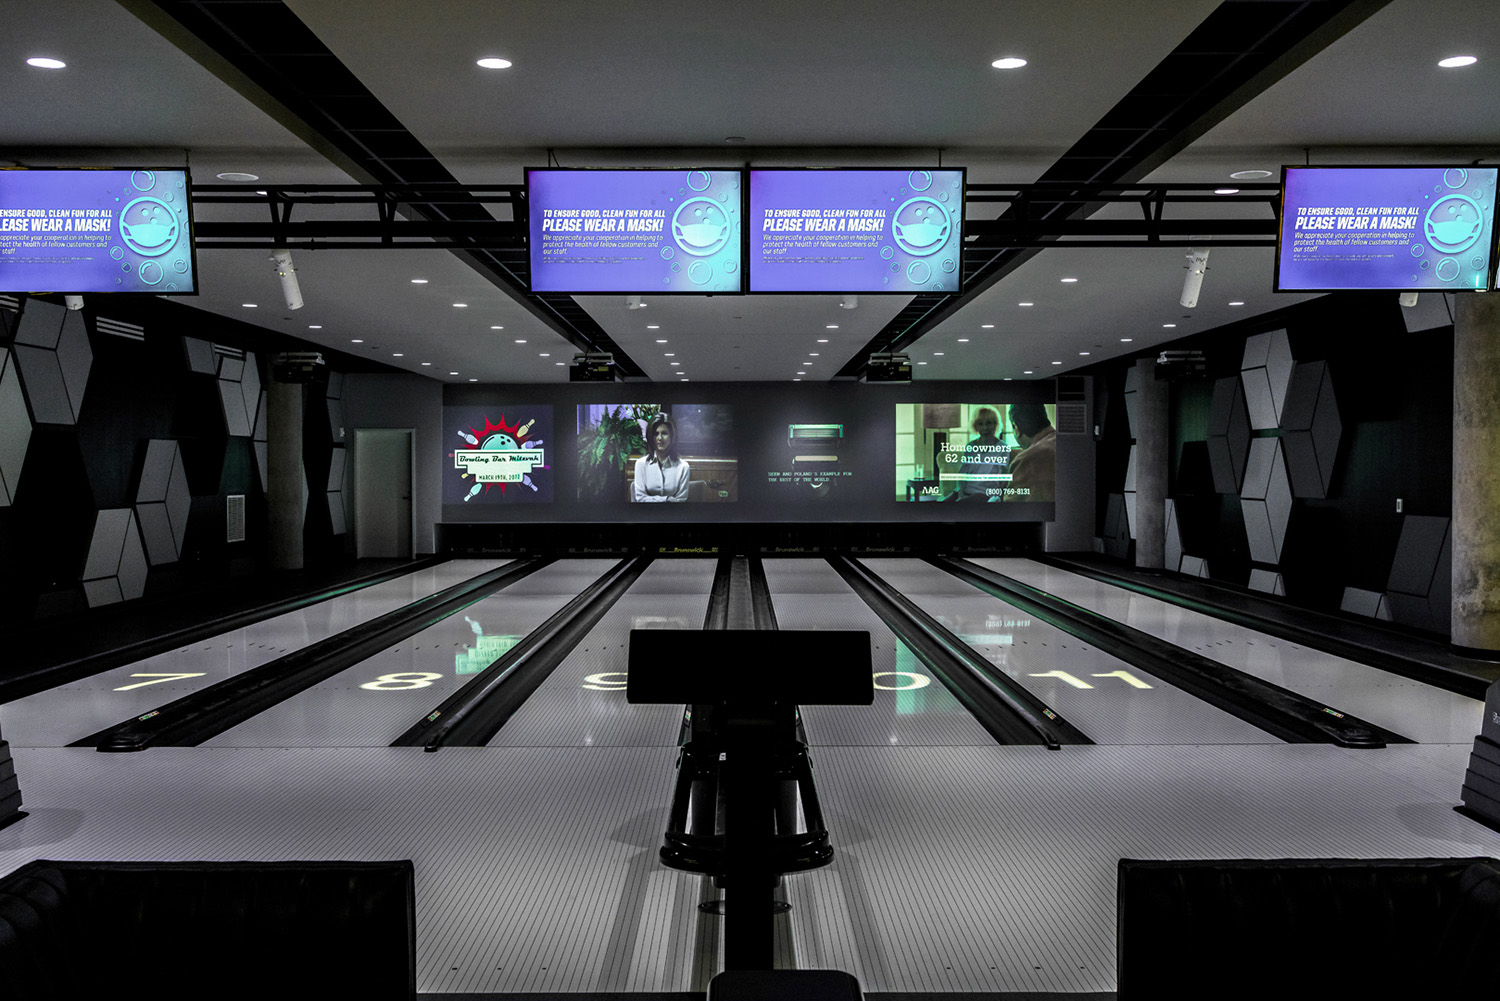 A videowall in each bowling alley can display televised programming interspersed with colorful advertisements for upcoming hotel events and featured restaurant and bar specials.